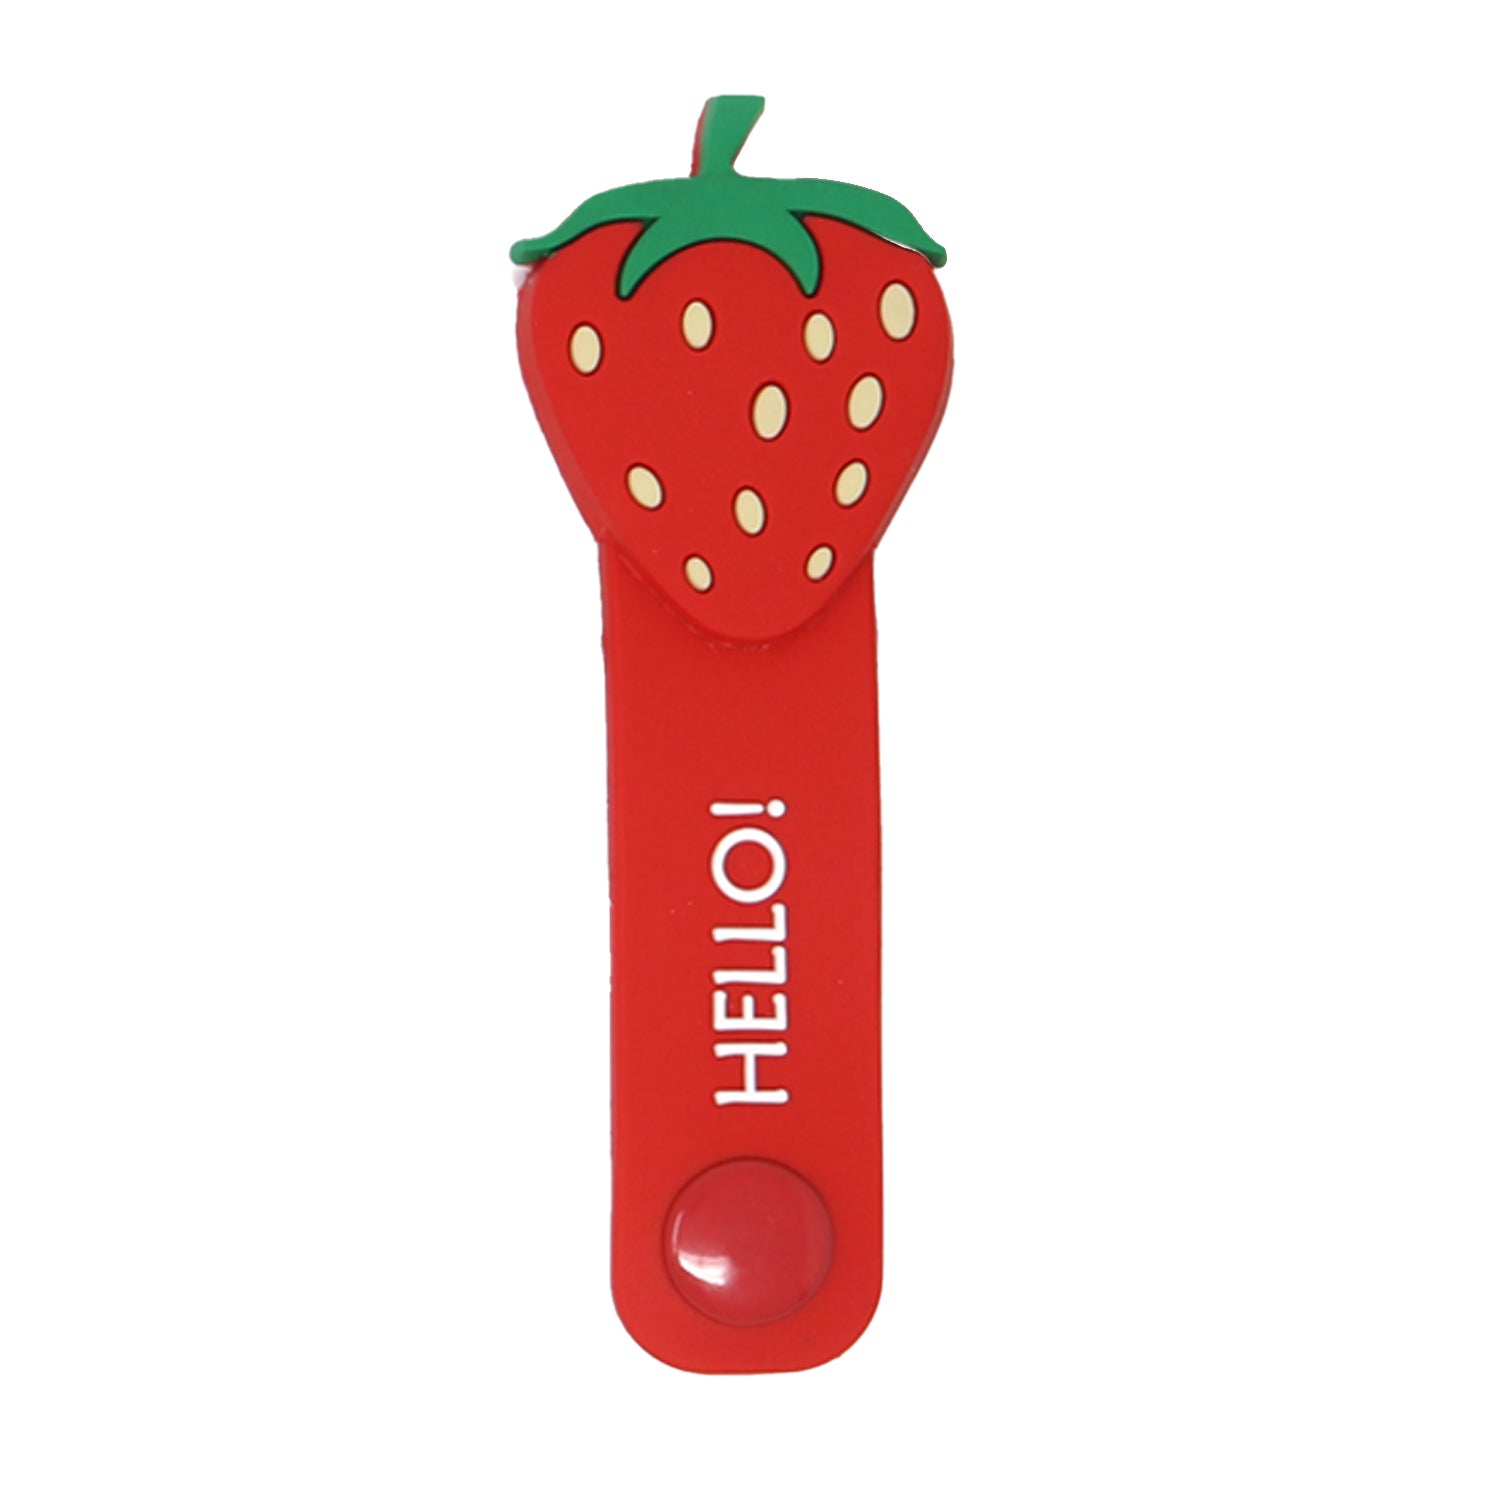 Strawberry Snap Cable Organizer